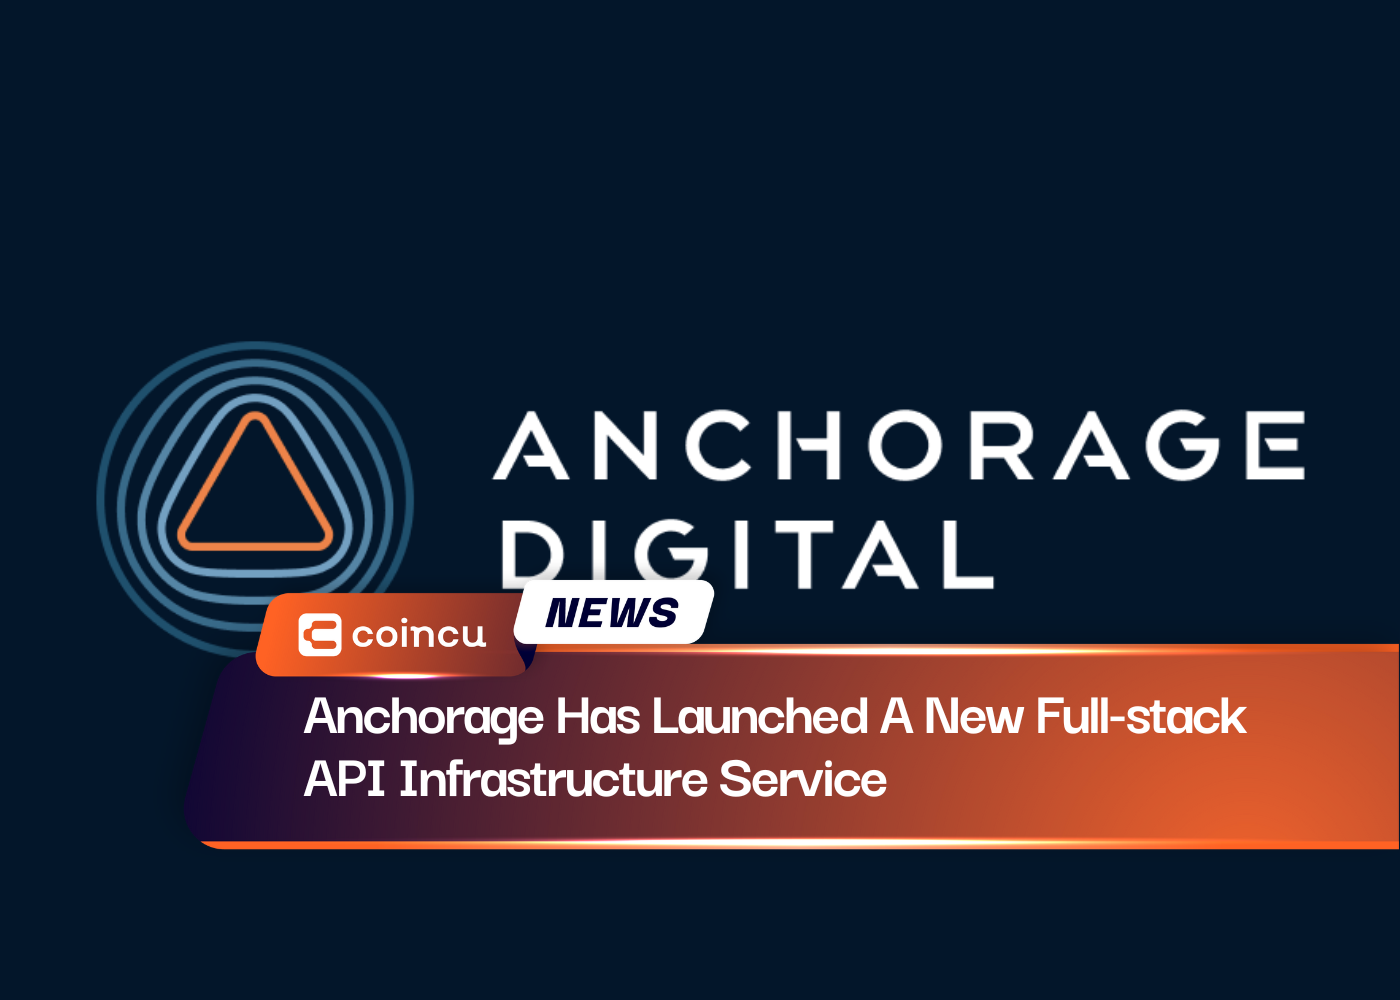 Anchorage Has Launched A New Full-stack API Infrastructure Service